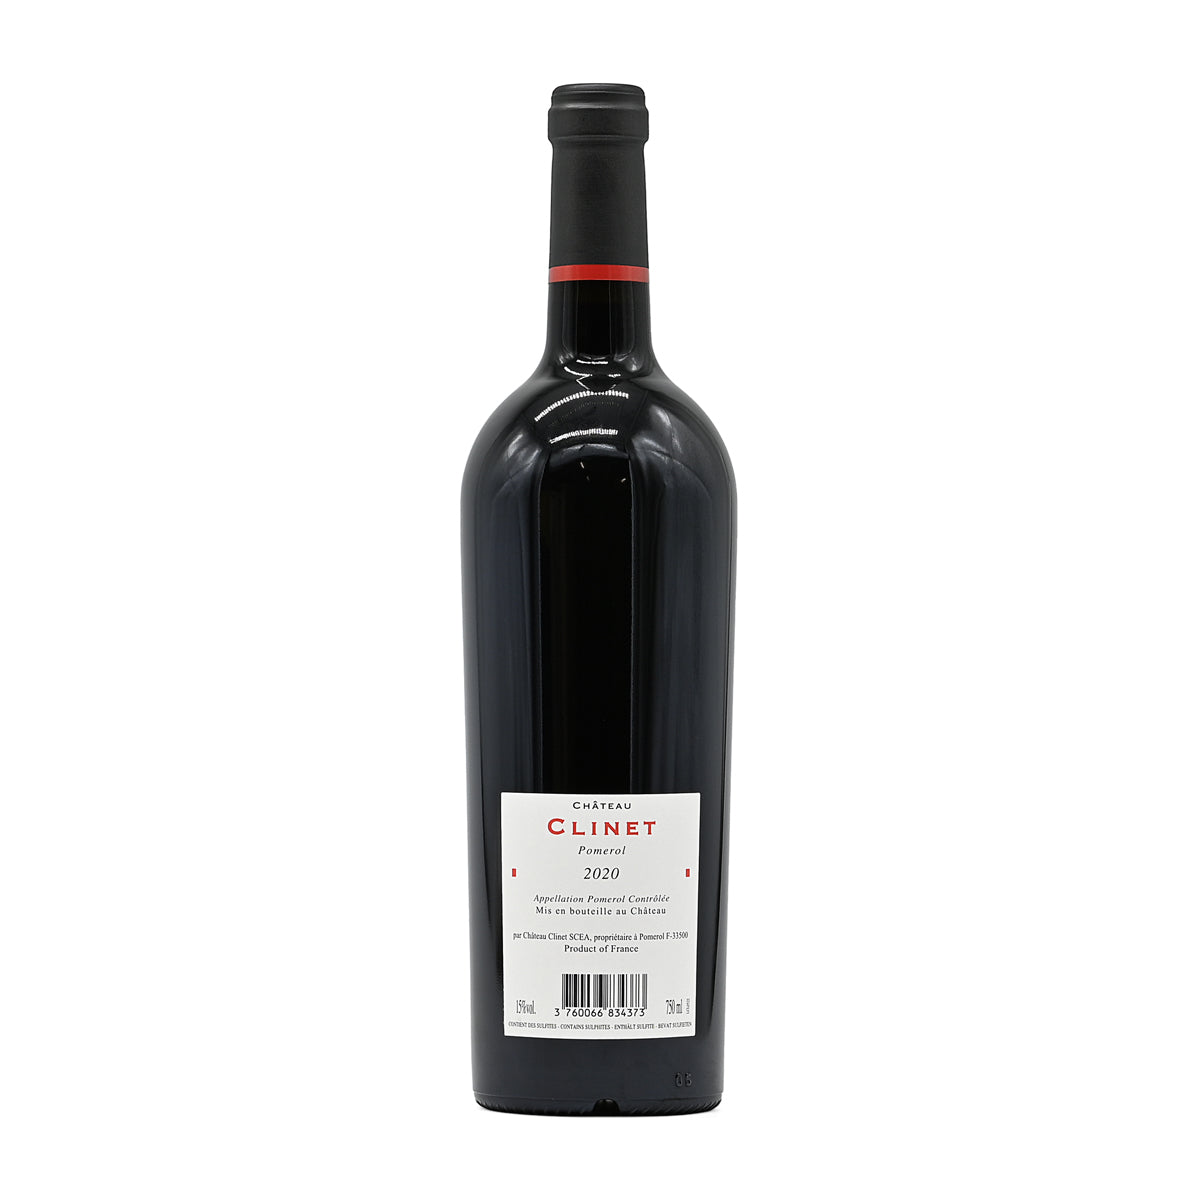 Chateau Clinet 2020, 750ml French red wine, made from a blend of Merlot and Cabernet Sauvignon; from Pomerol, Bordeaux, France – GDV Fine Wines, Hong Kong